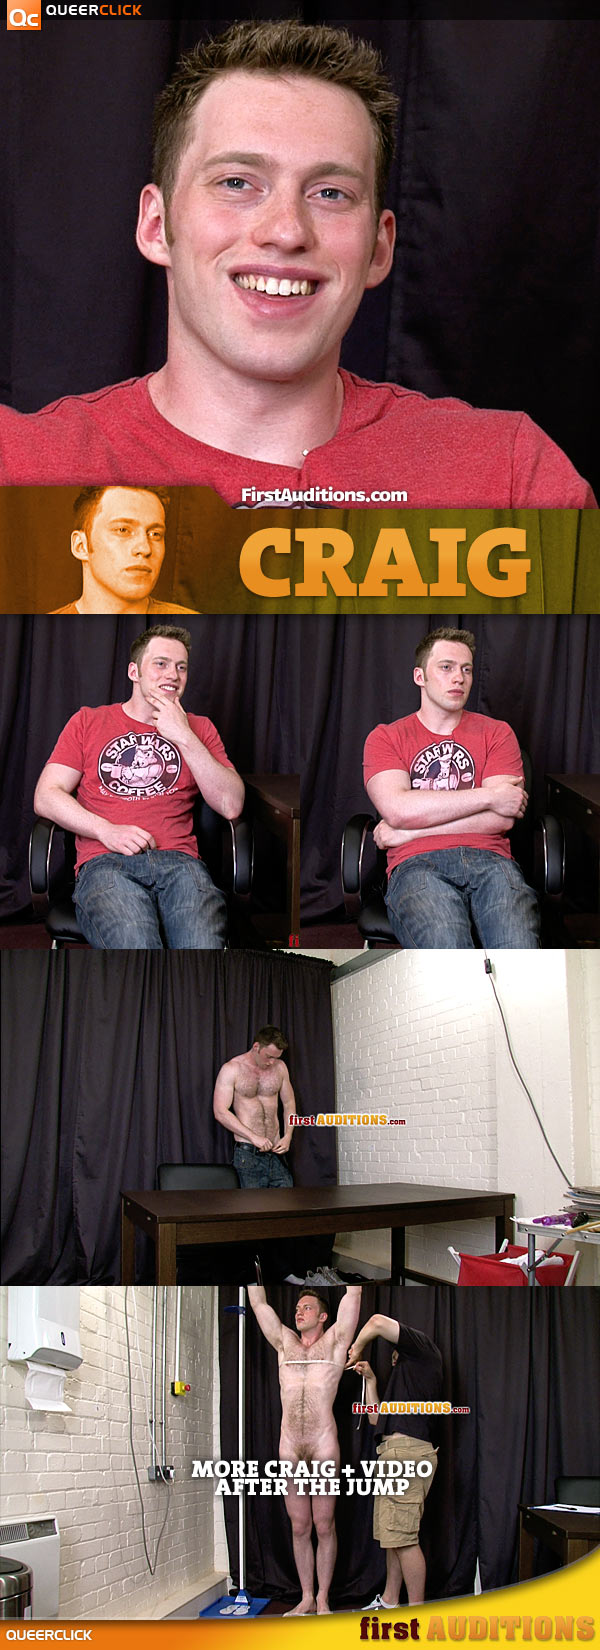 First Auditions: Craig